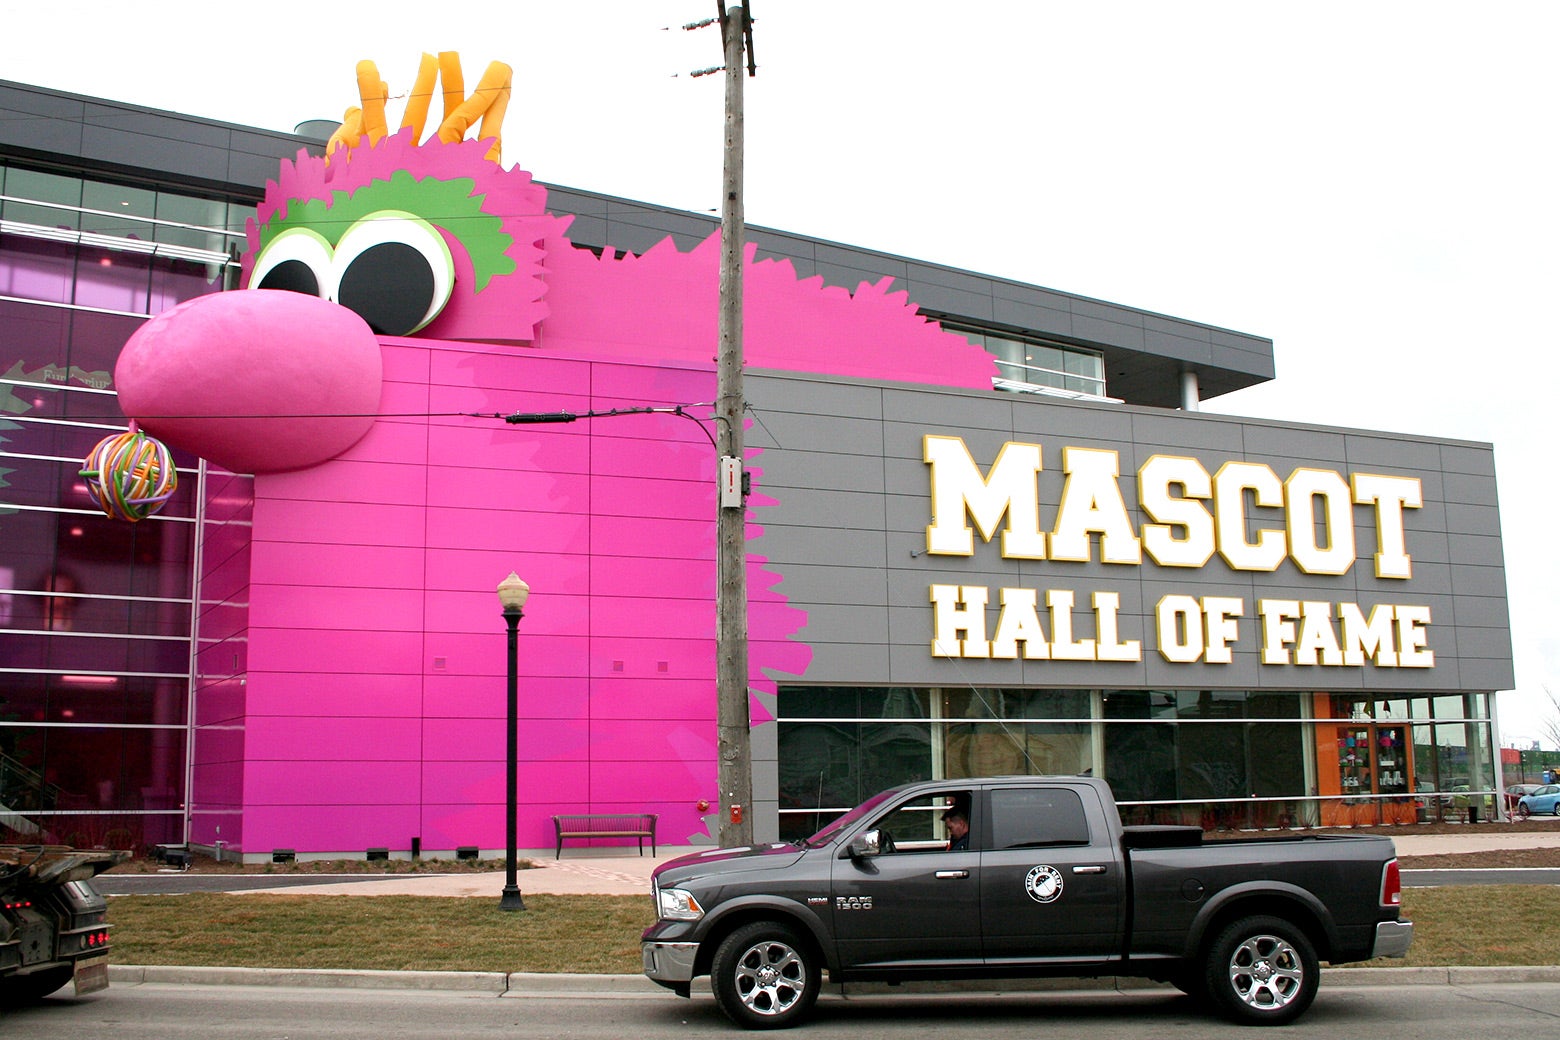 The Mascot Hall of Fame in Whiting, Indiana. 